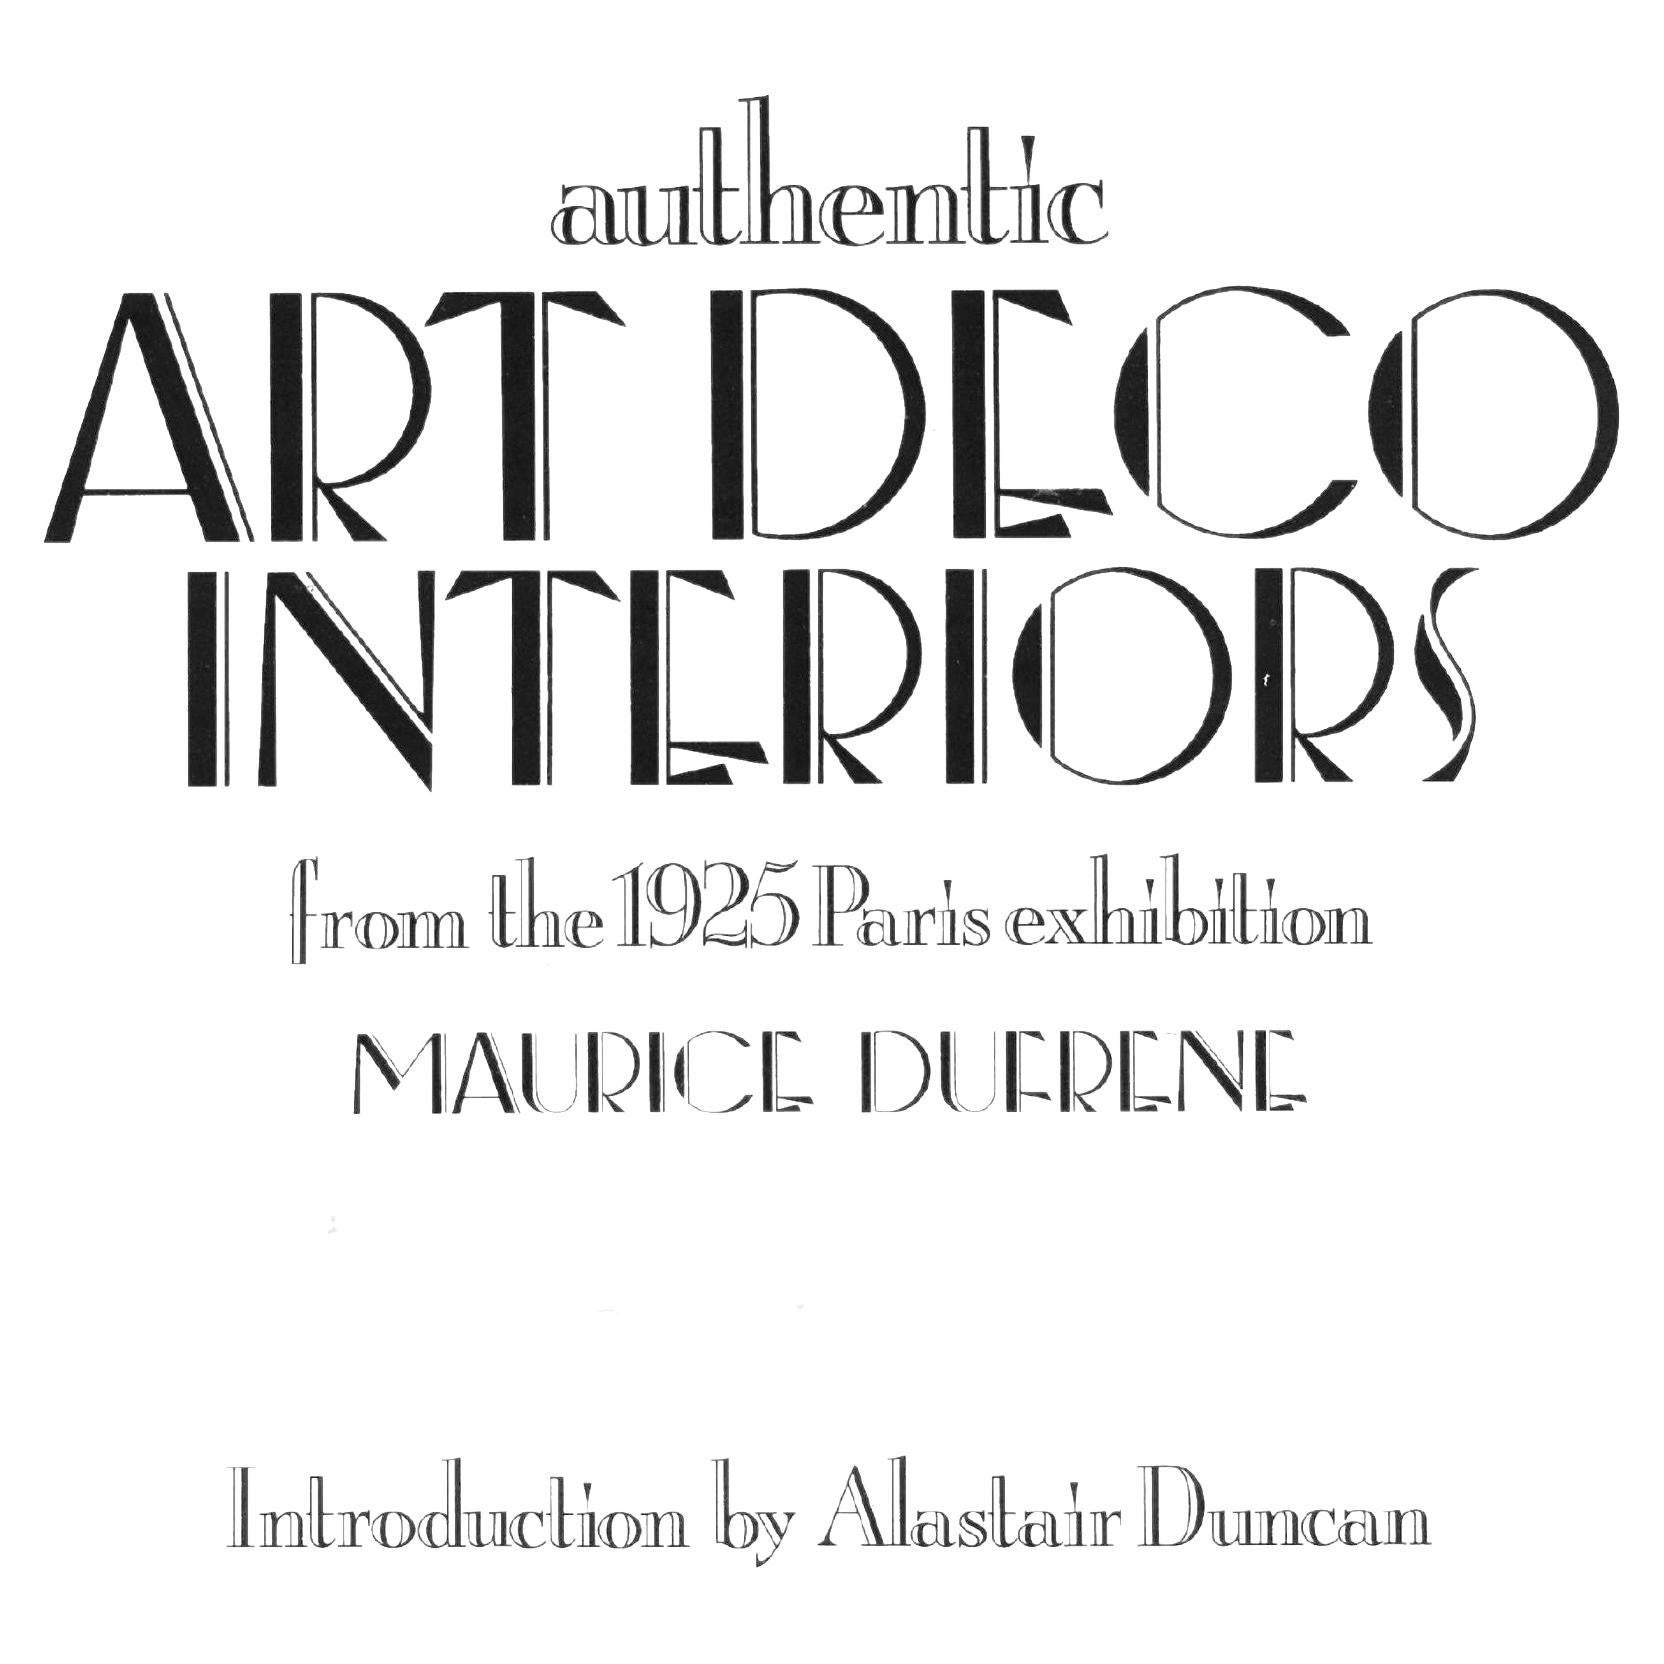 by Maurice Dufrene
The dramatic 1925 Paris Exposition des Arts Decoratifs heralded the emergence of the Art Deco  movement as a great decorative style.
This classic work features a scholarly introduction by Alastair Duncan whose research and many